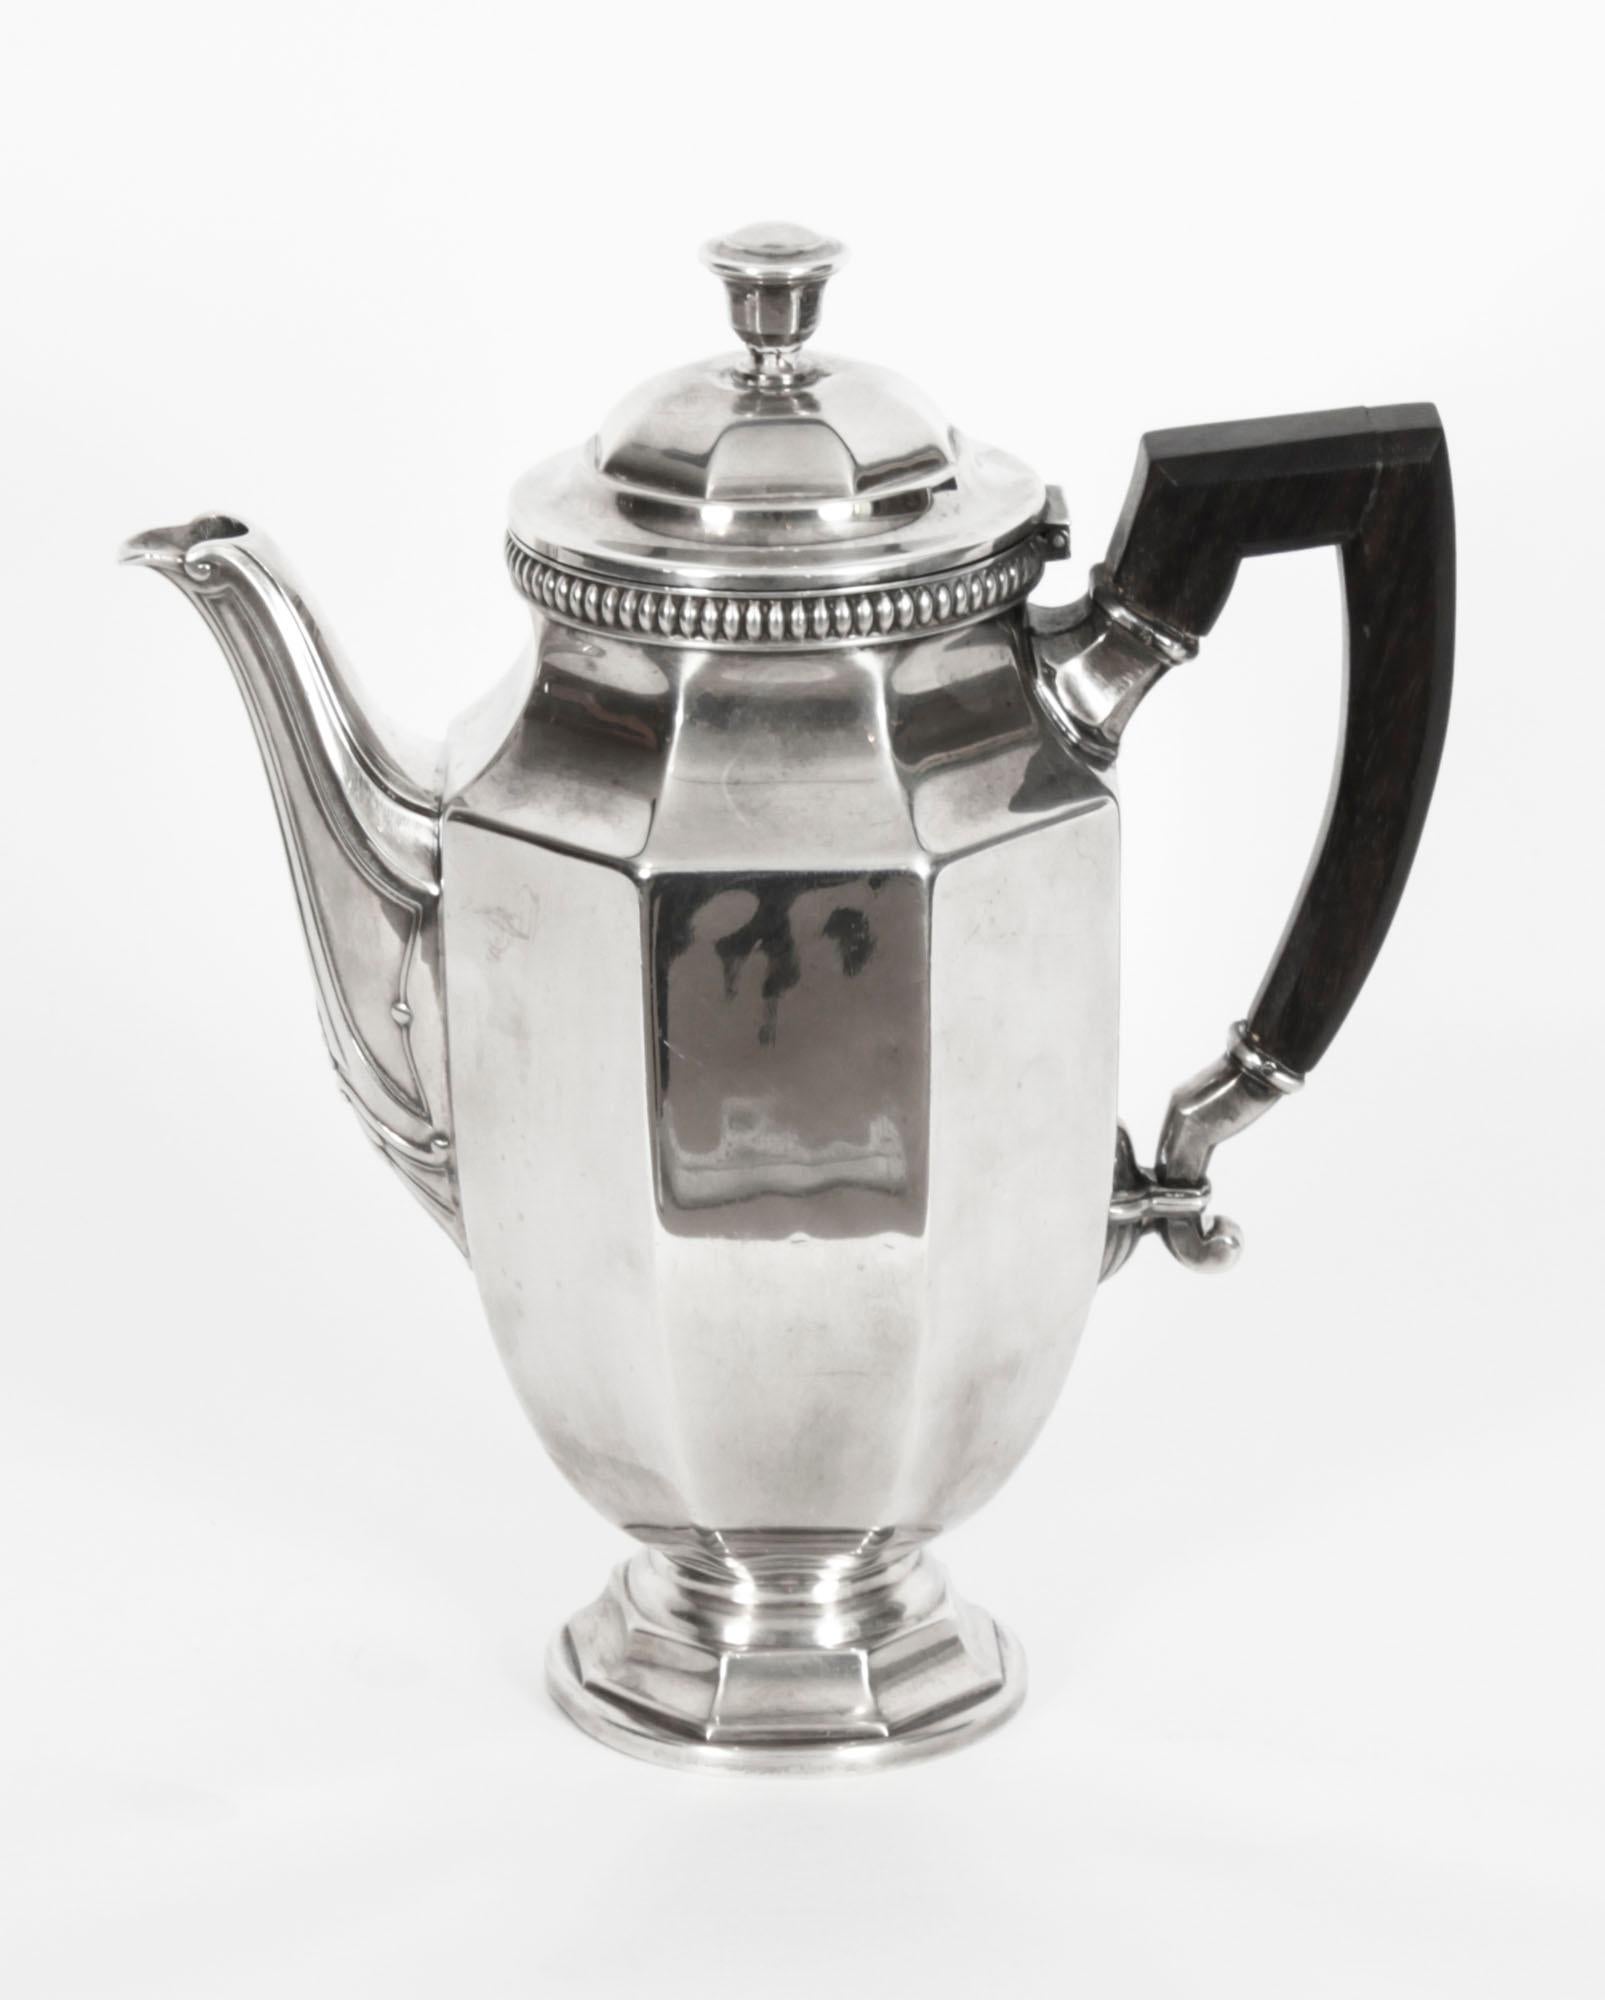 Antique Art Deco French Christofle Colbert Gallia silver plate tea & coffee 4 piece set, circa 1920's.

The set includes stylish coffee and tea pots with a lidded sugar pot and a milk jug.

They feature octagon shaped bodies with shaped hardwood